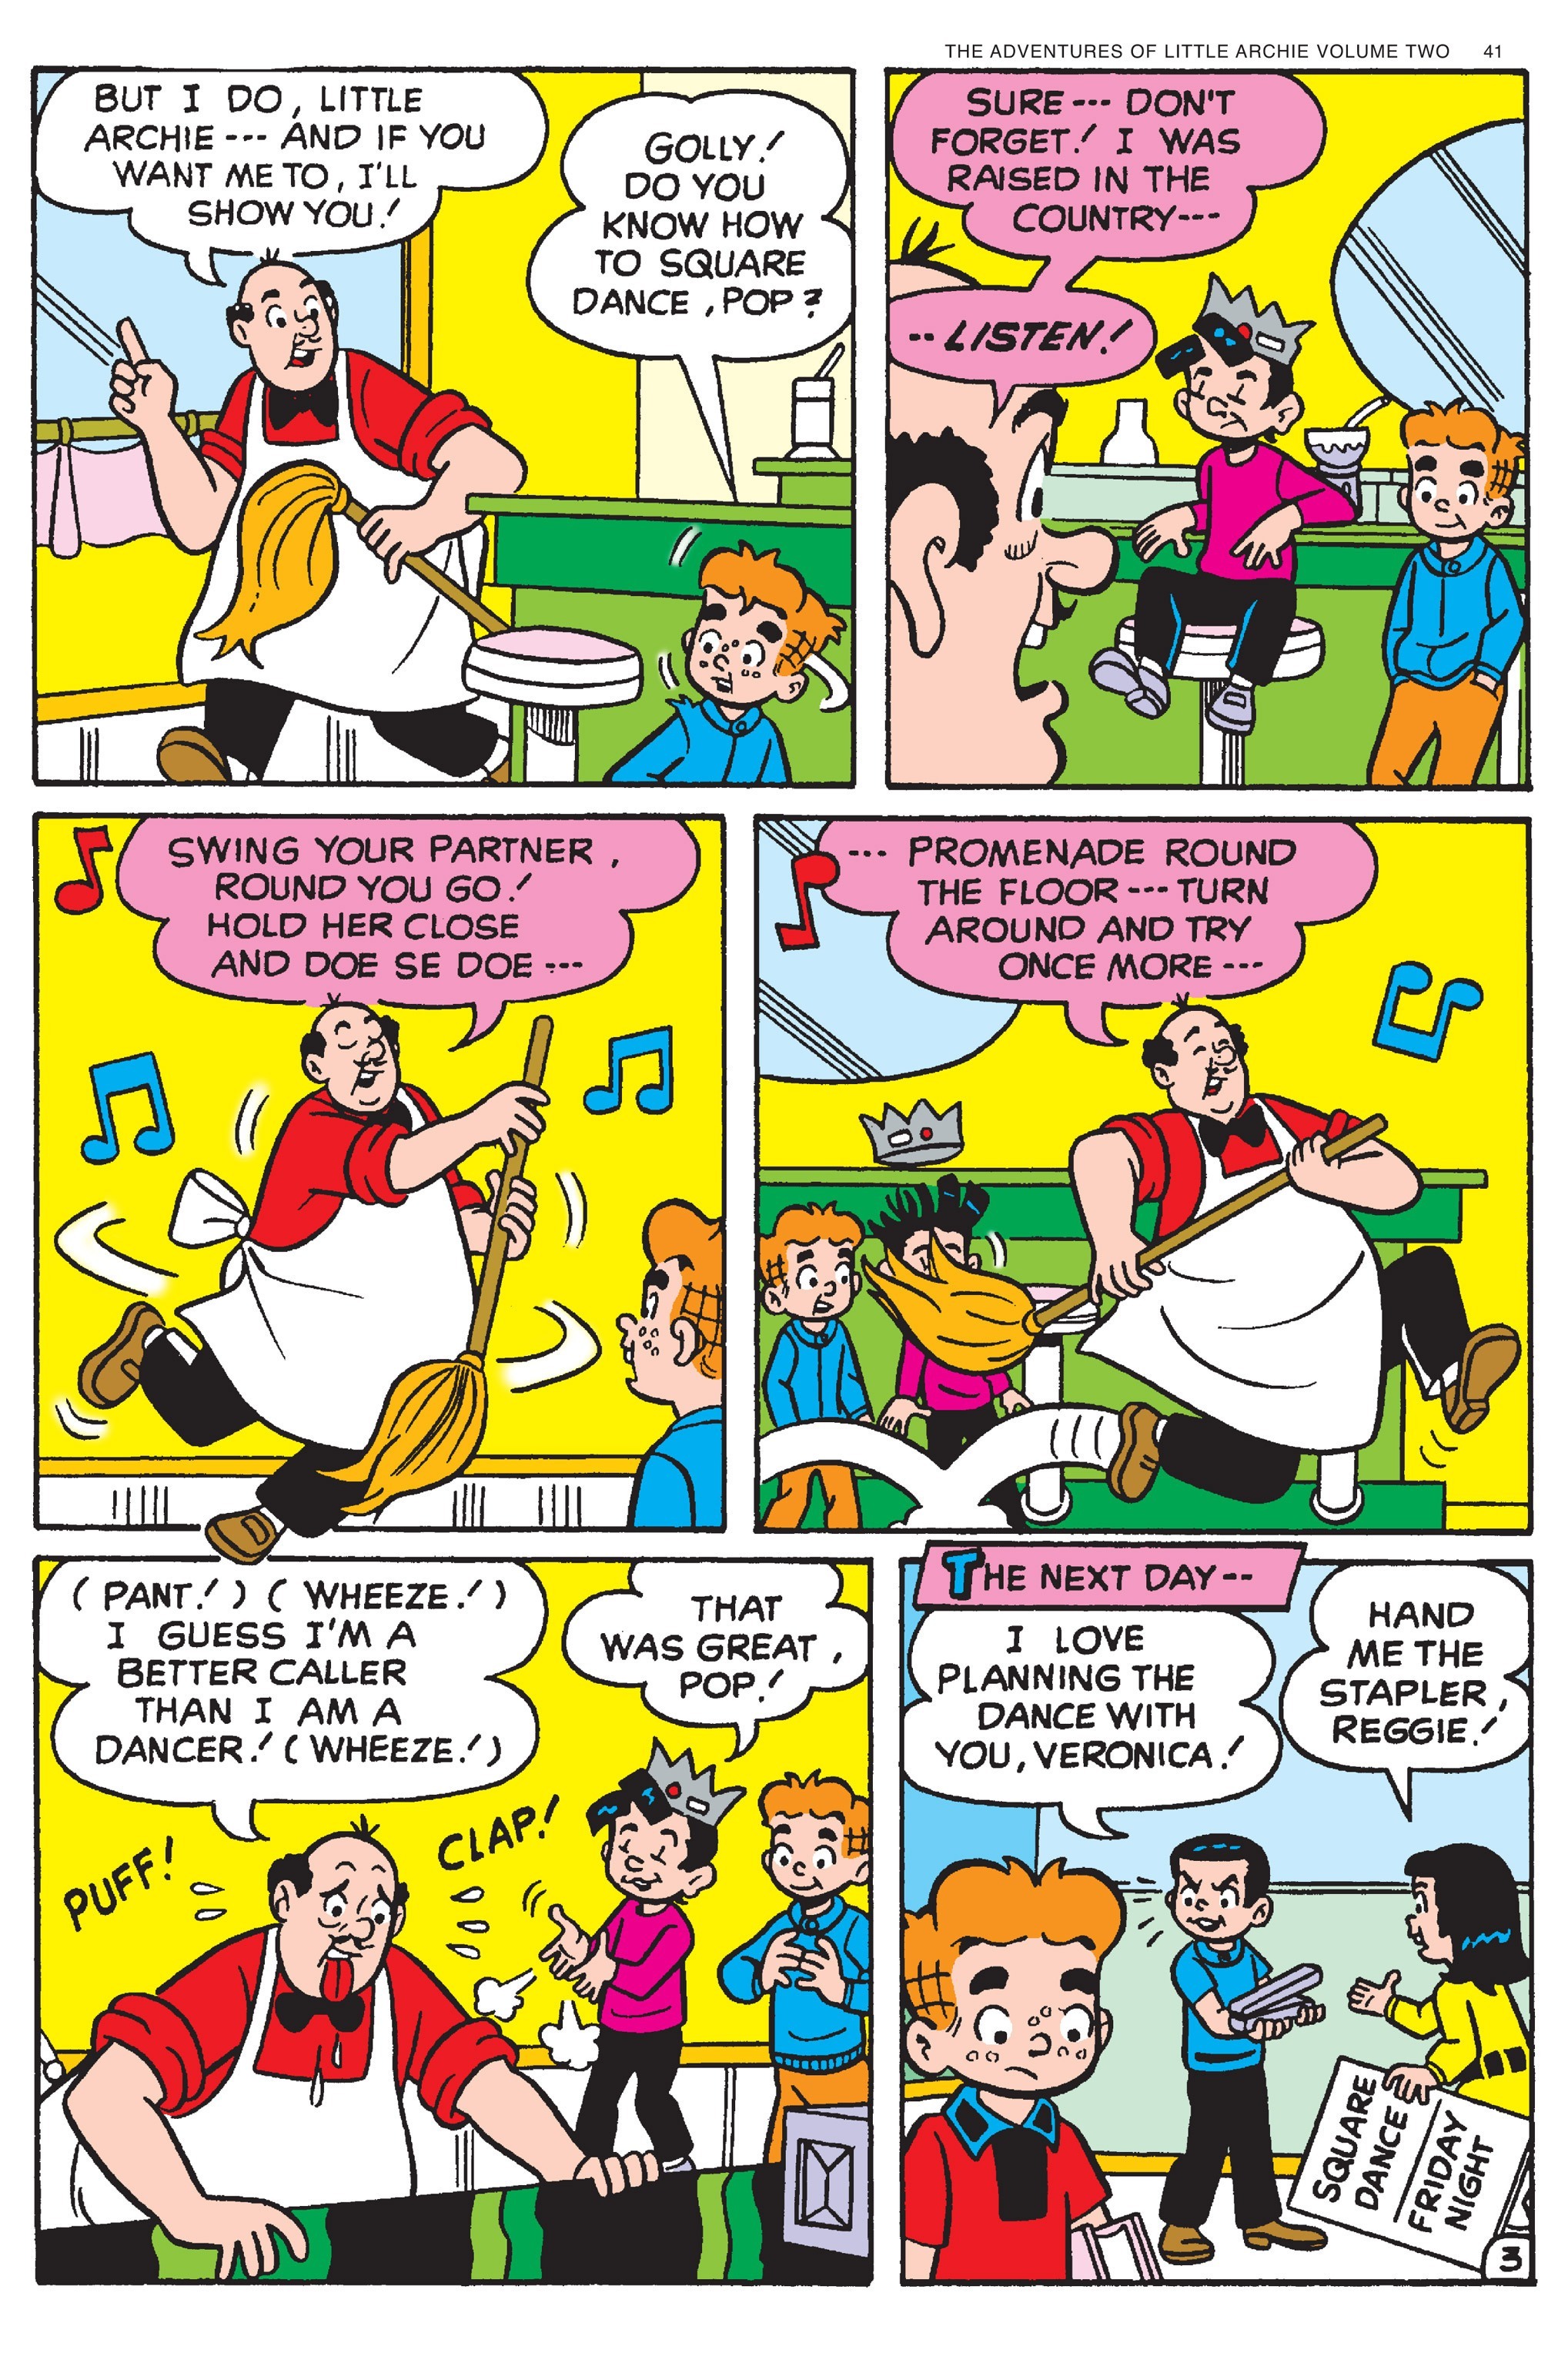 Read online Adventures of Little Archie comic -  Issue # TPB 2 - 42